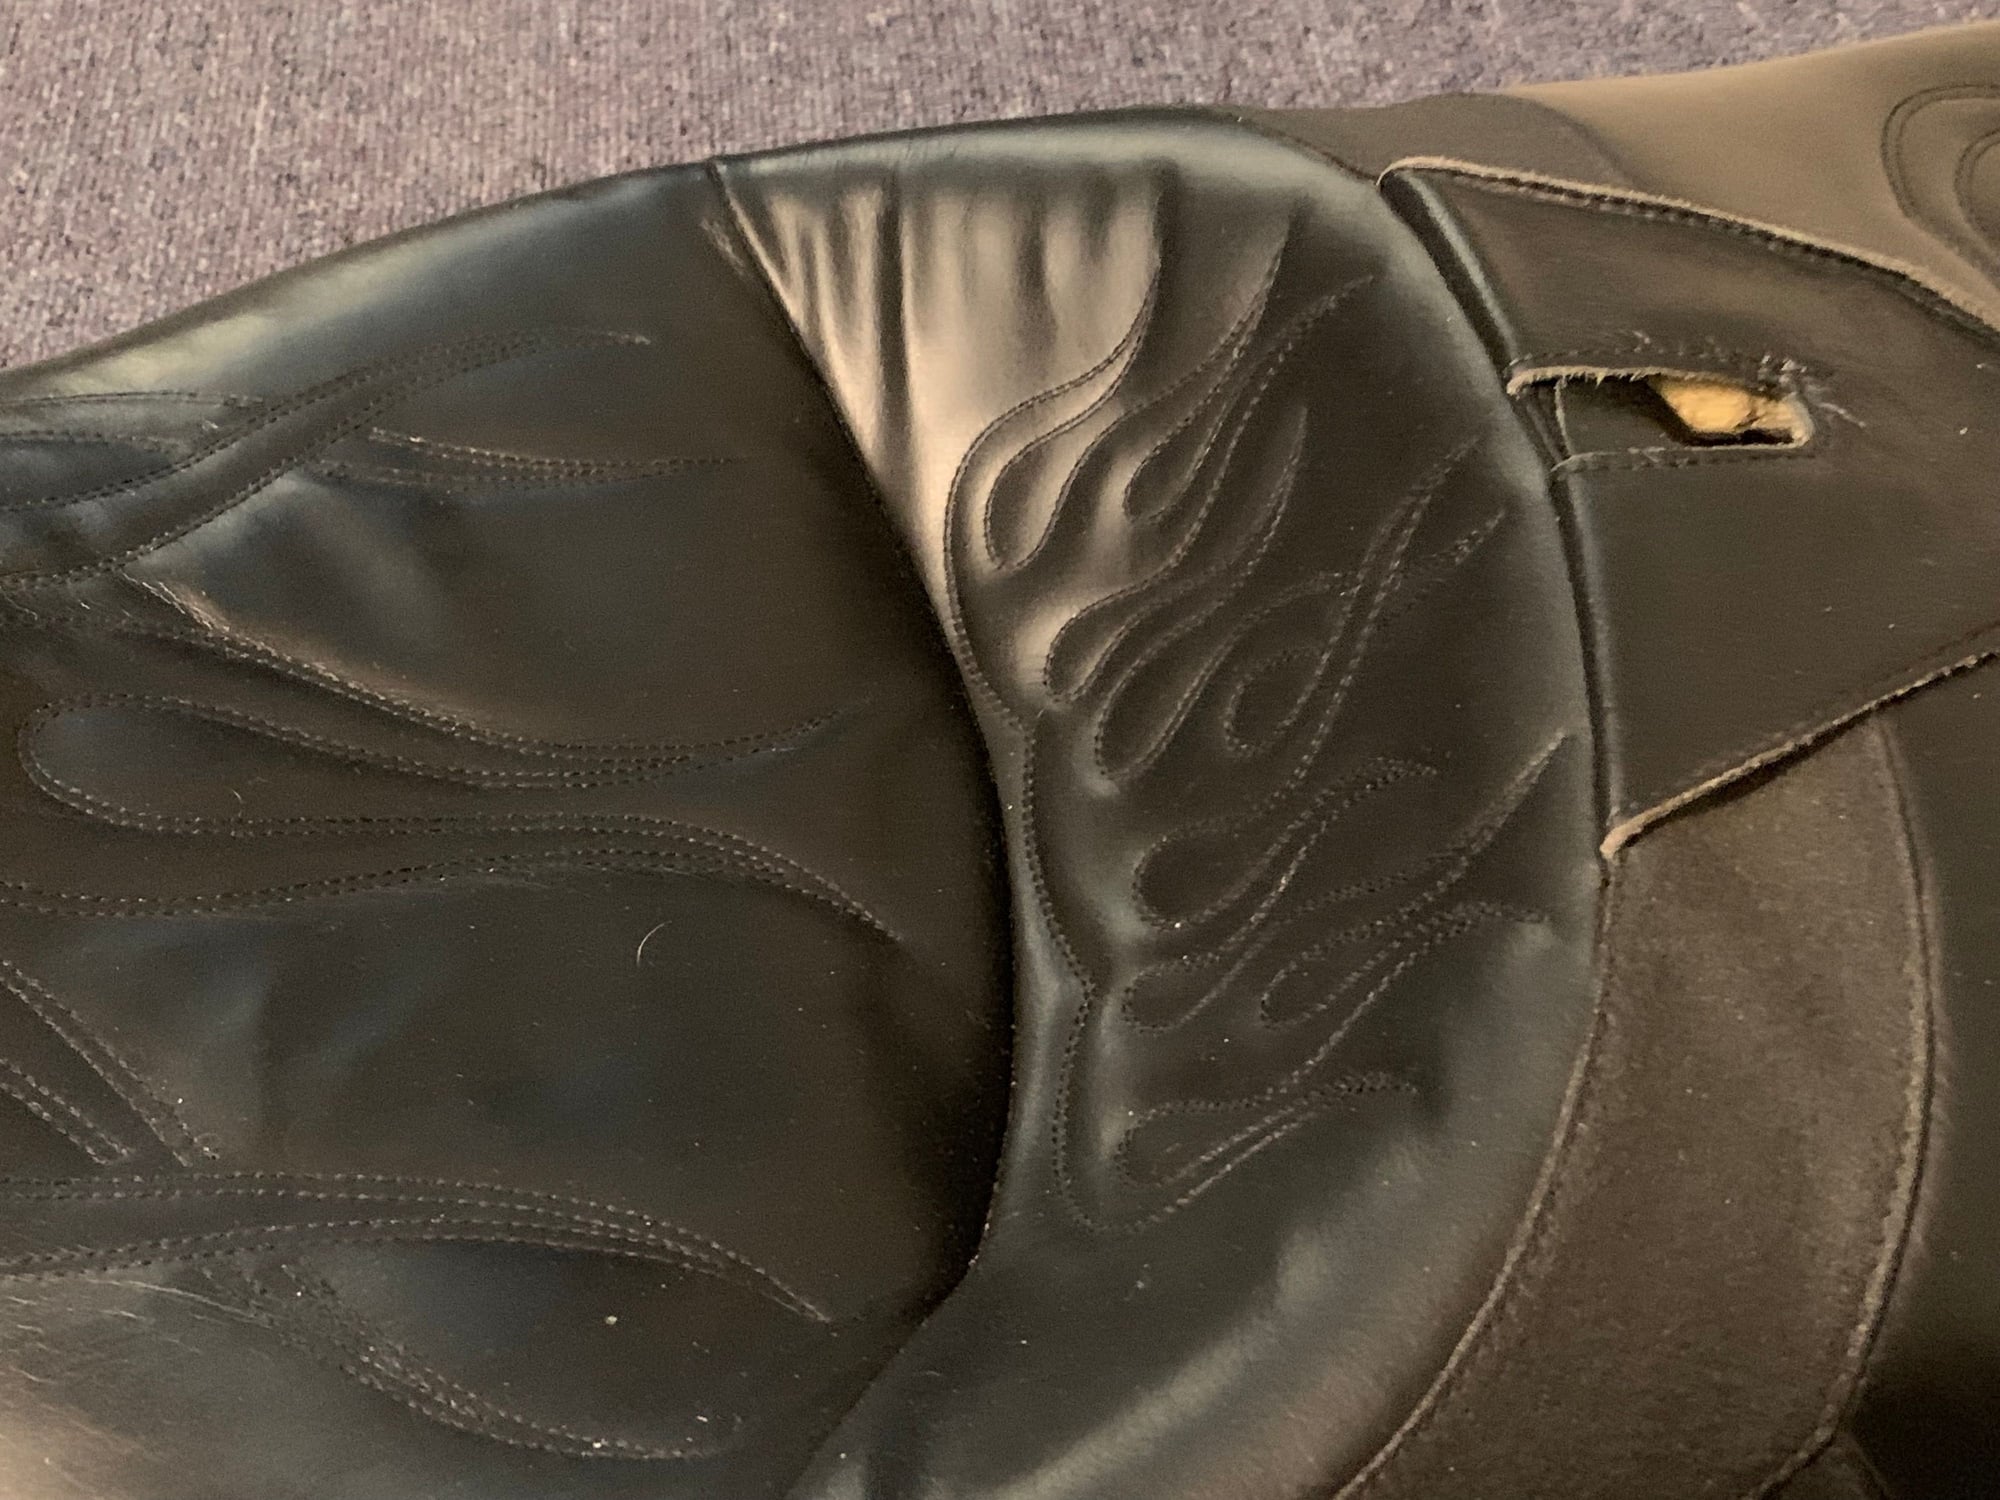 Corbin Touring 2-up with Heat and Flame Stitch - Harley Davidson Forums